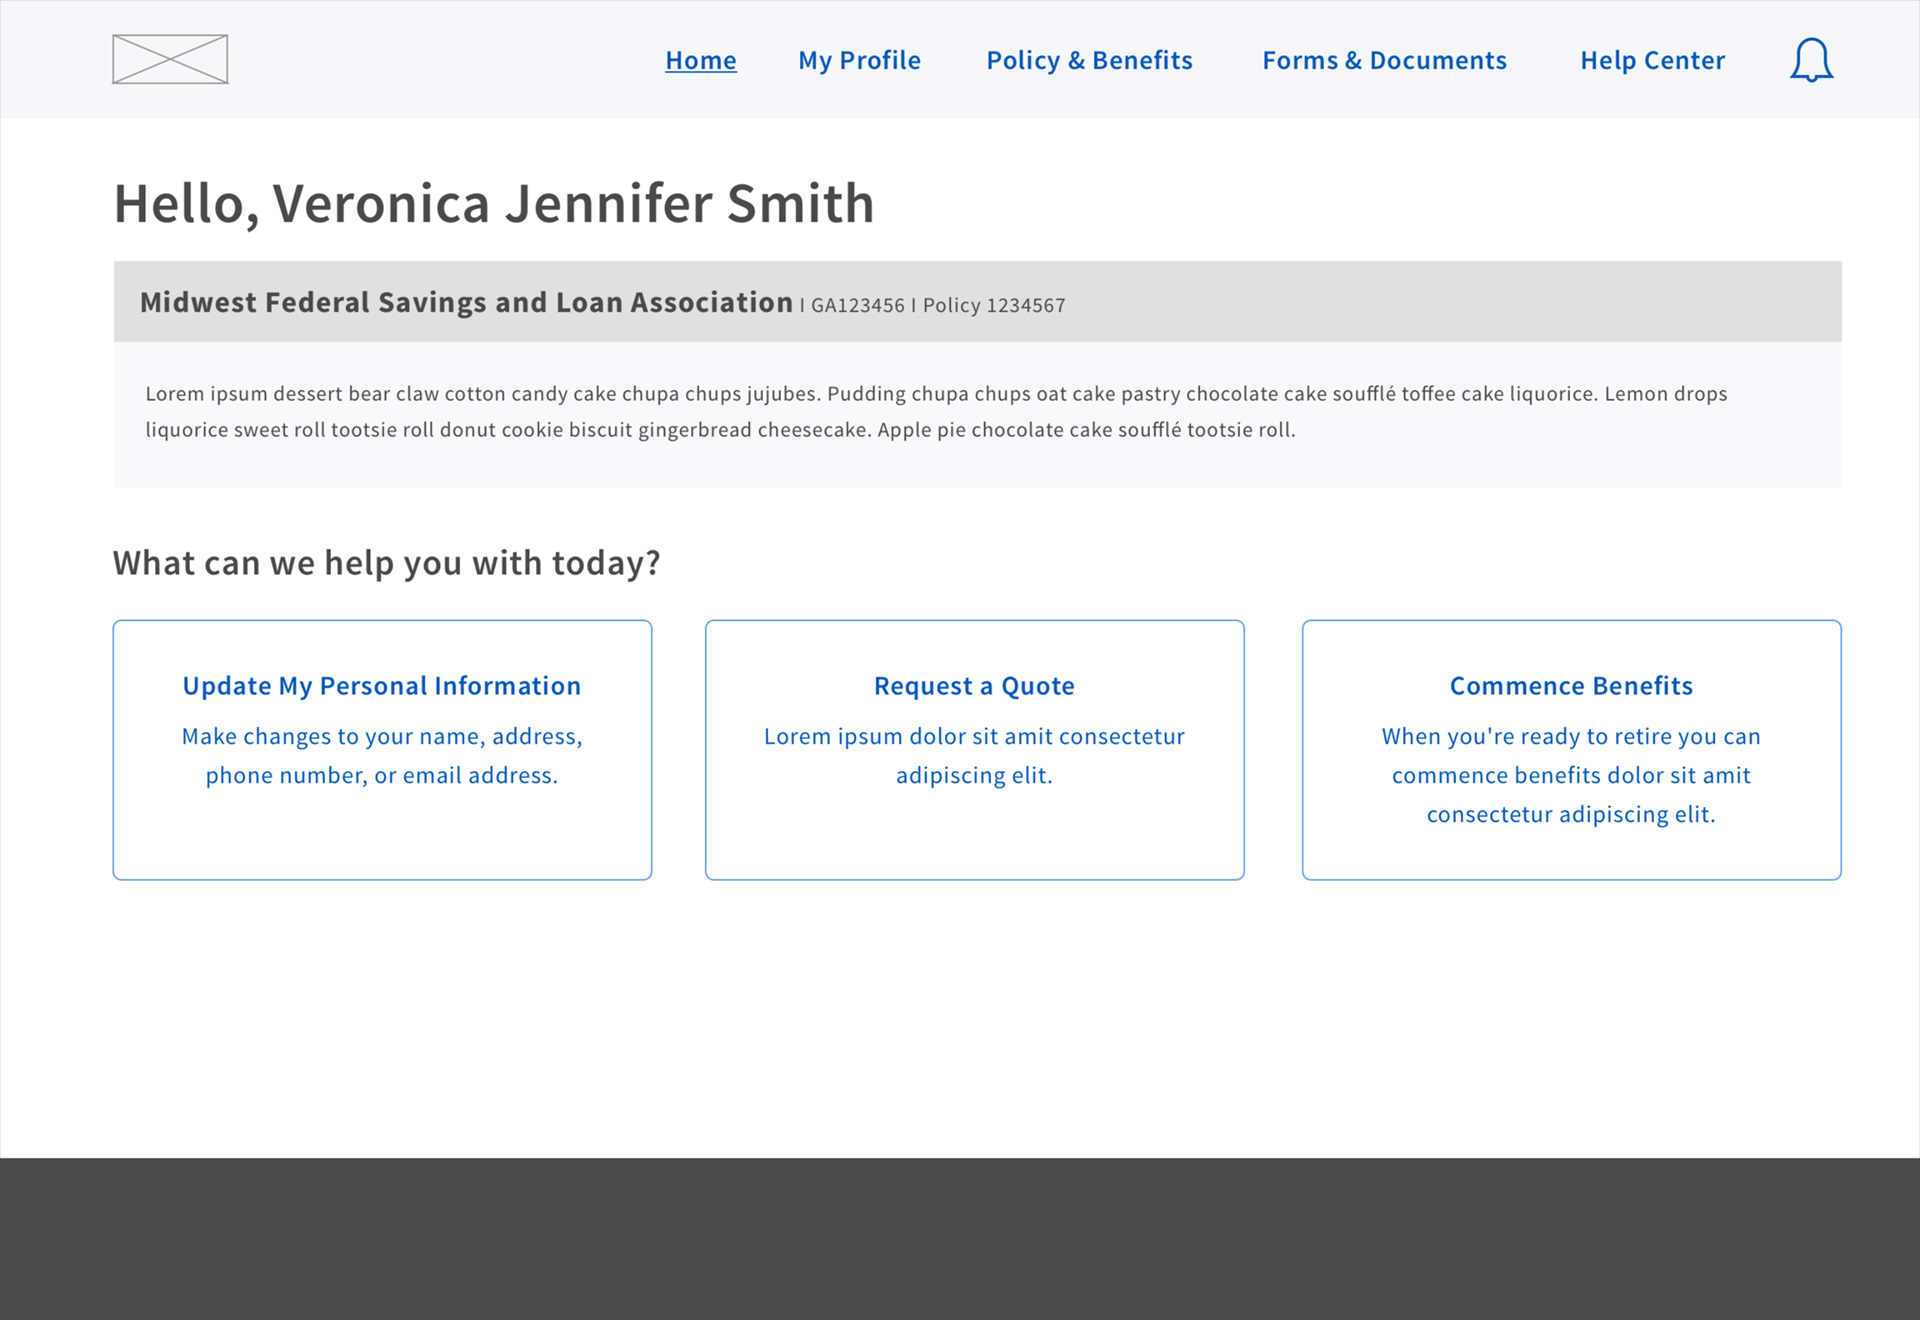 Pensions: Home Page Wireframe (Deferred Participant)